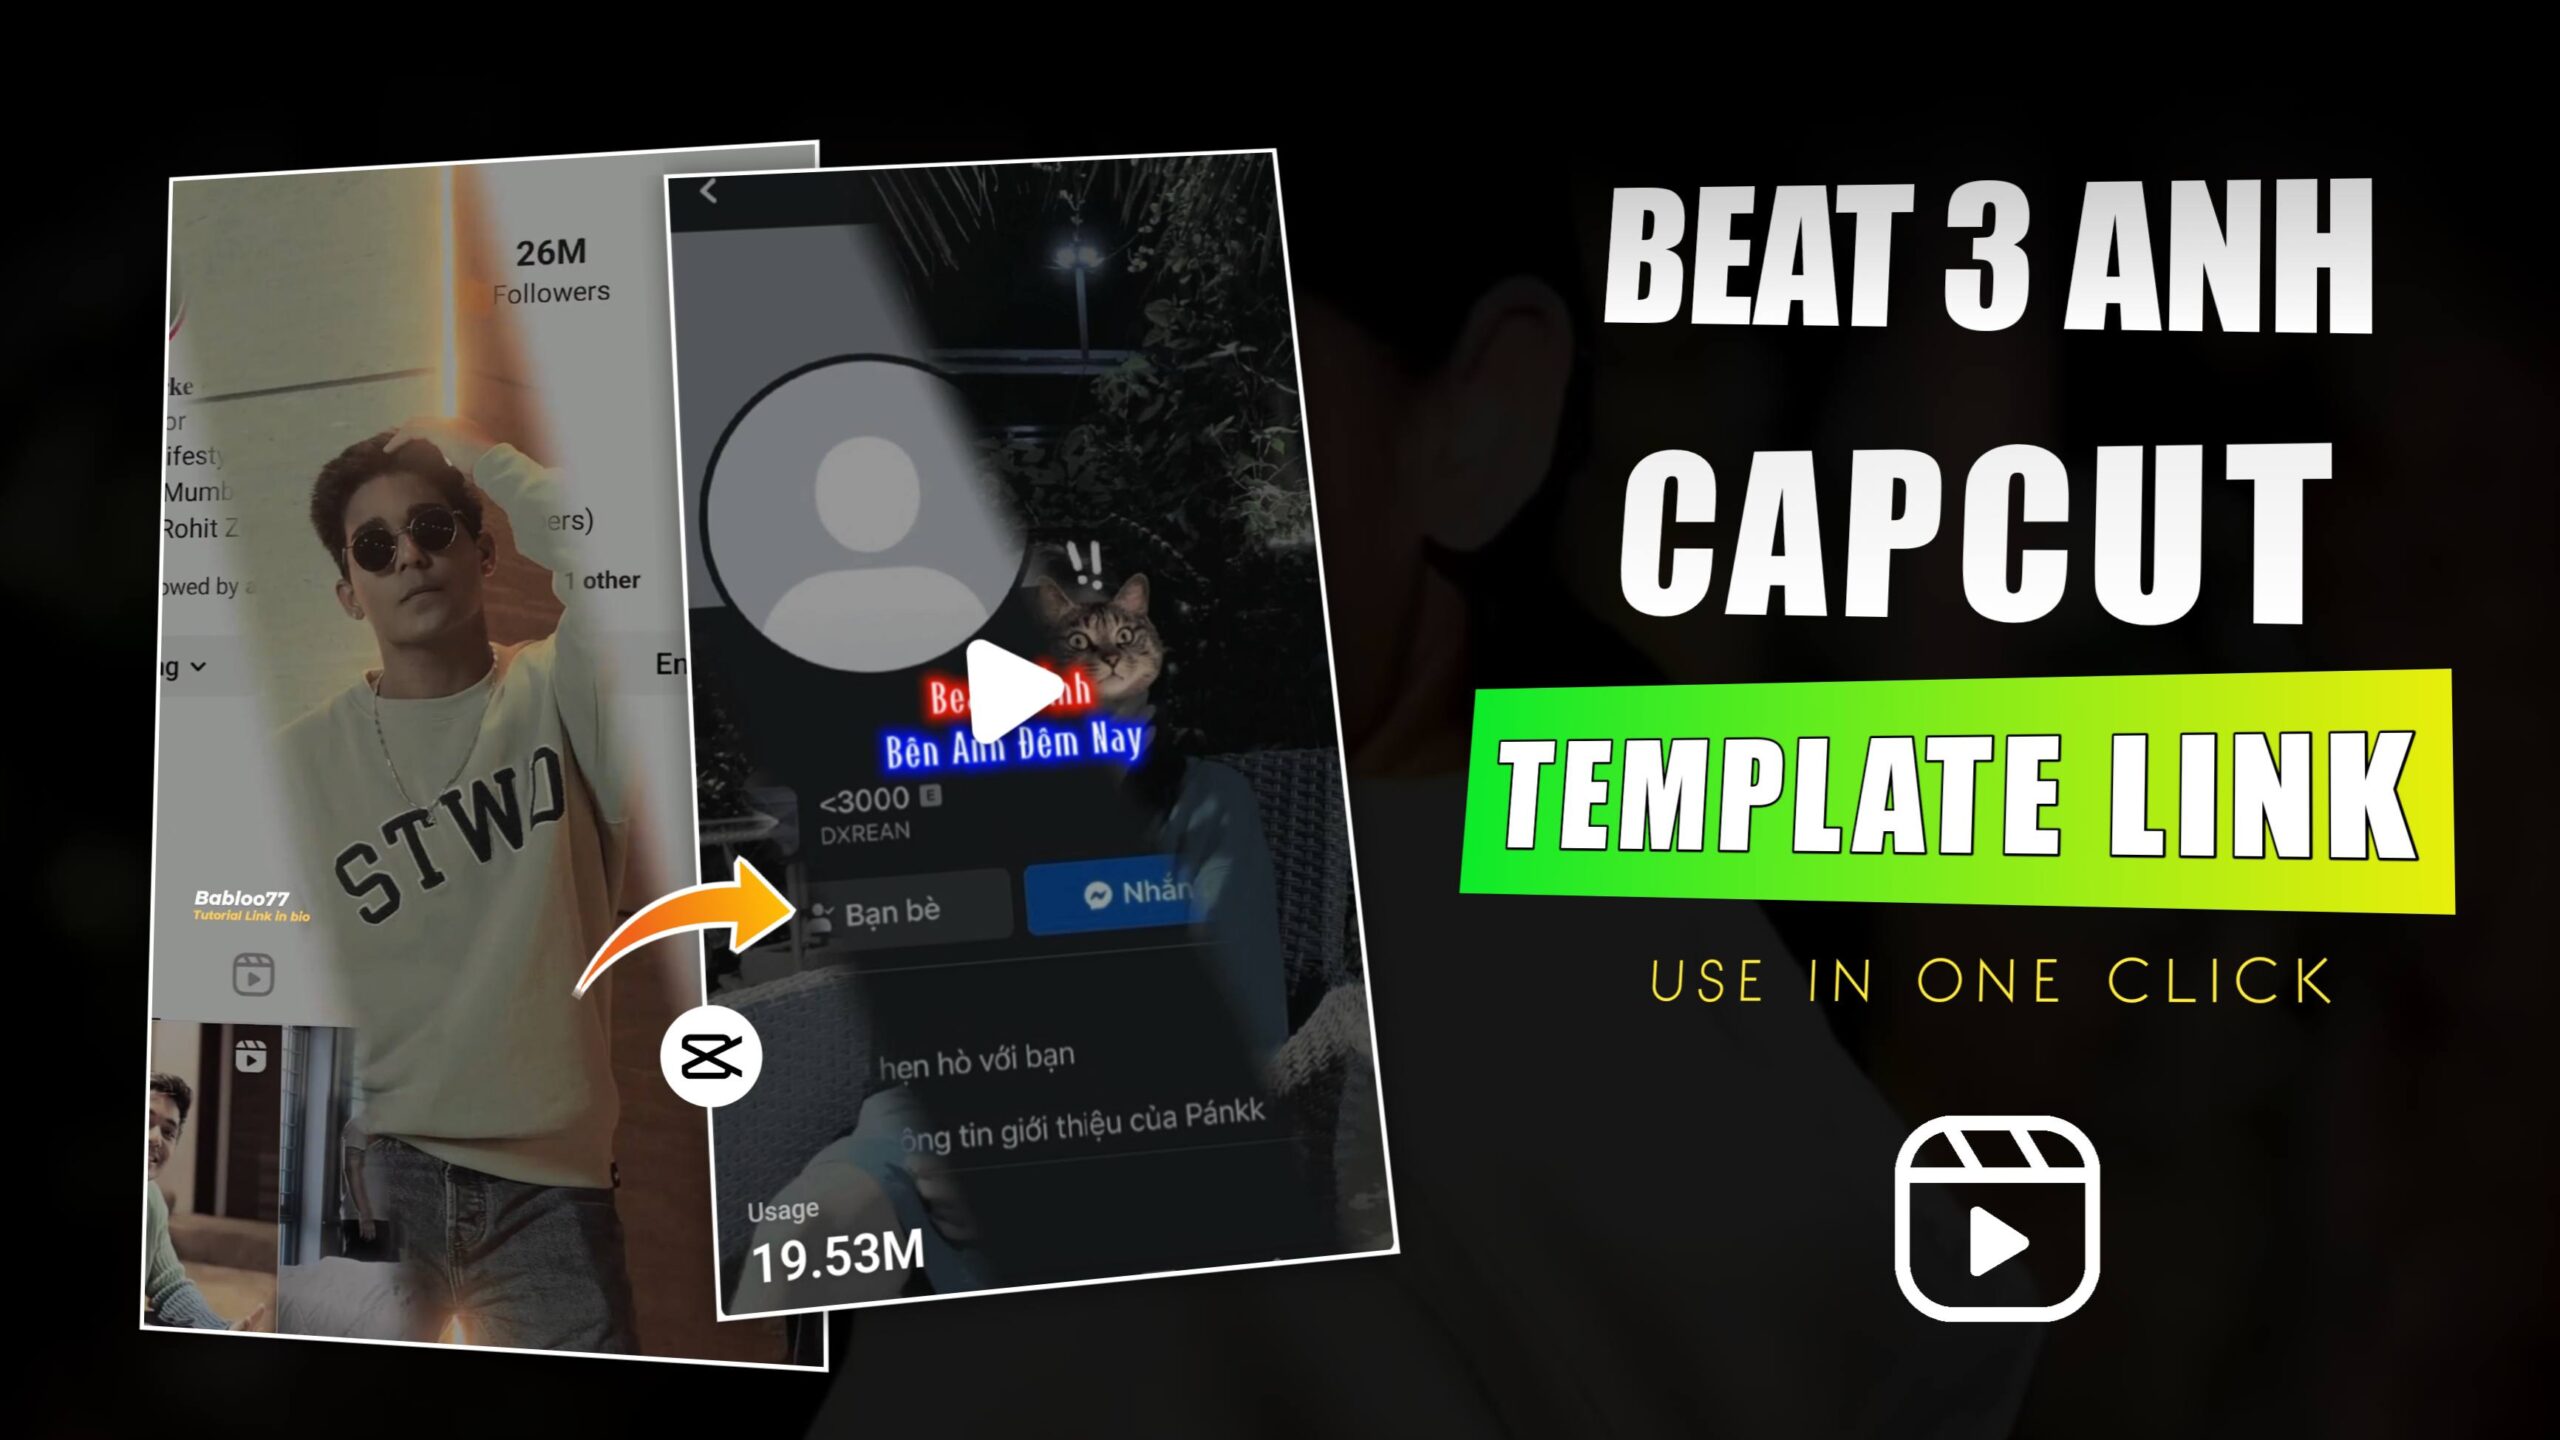 beat-3-anh-by-nhung-flop-vk-capcut-template-beat-3-anh-capcut-template